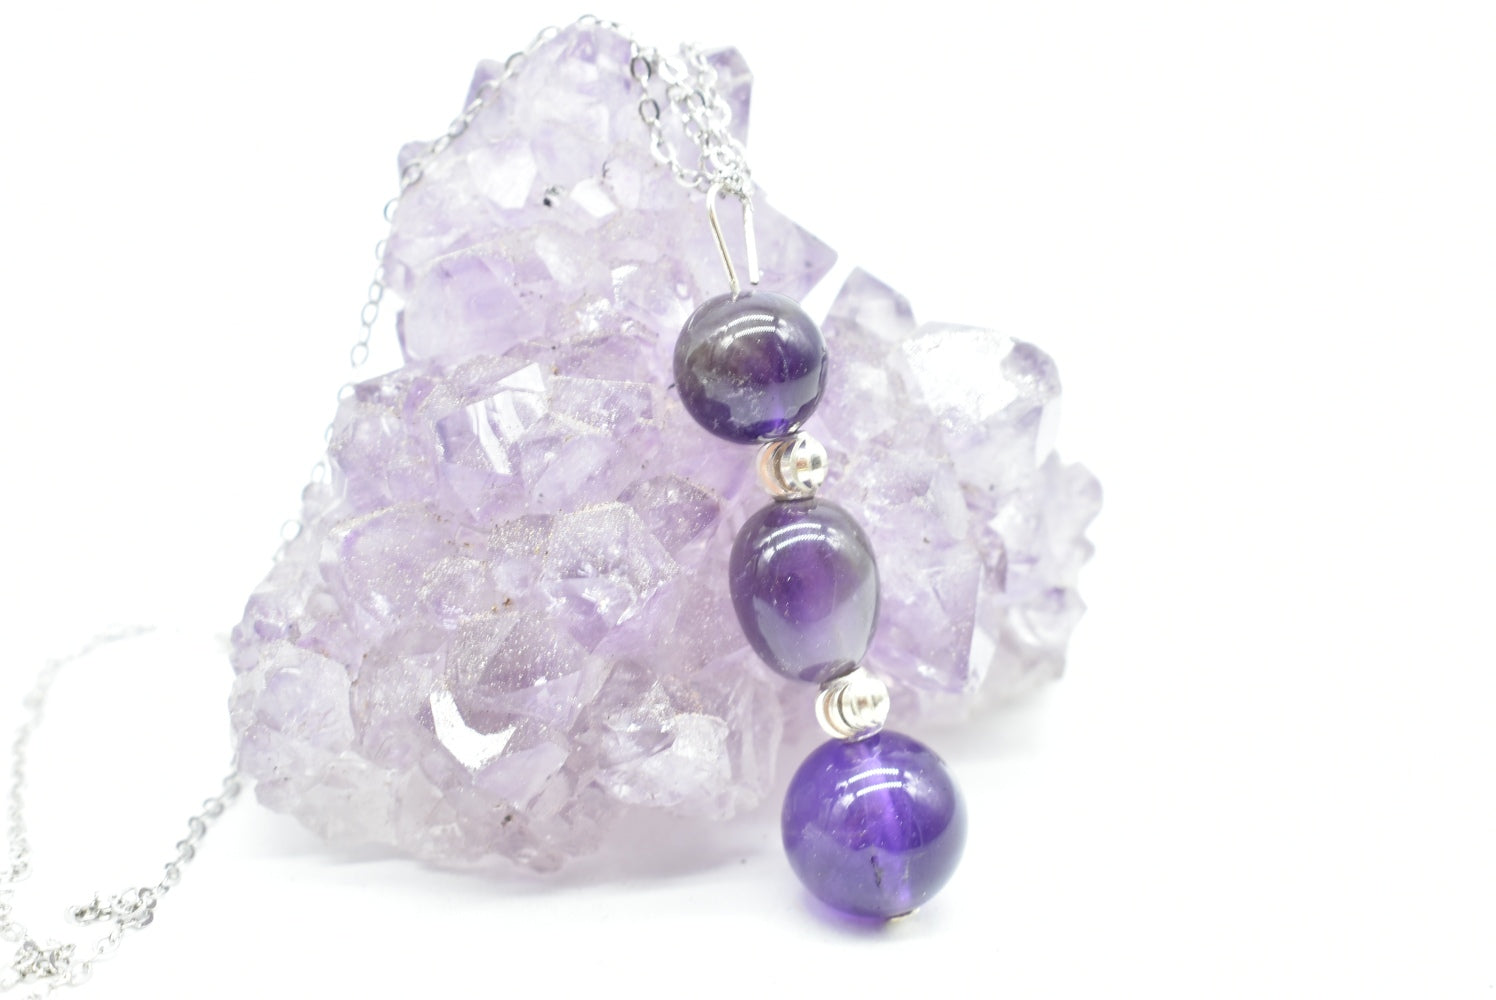 Amethyst beads pendant with supports and necklace in 925 Silver